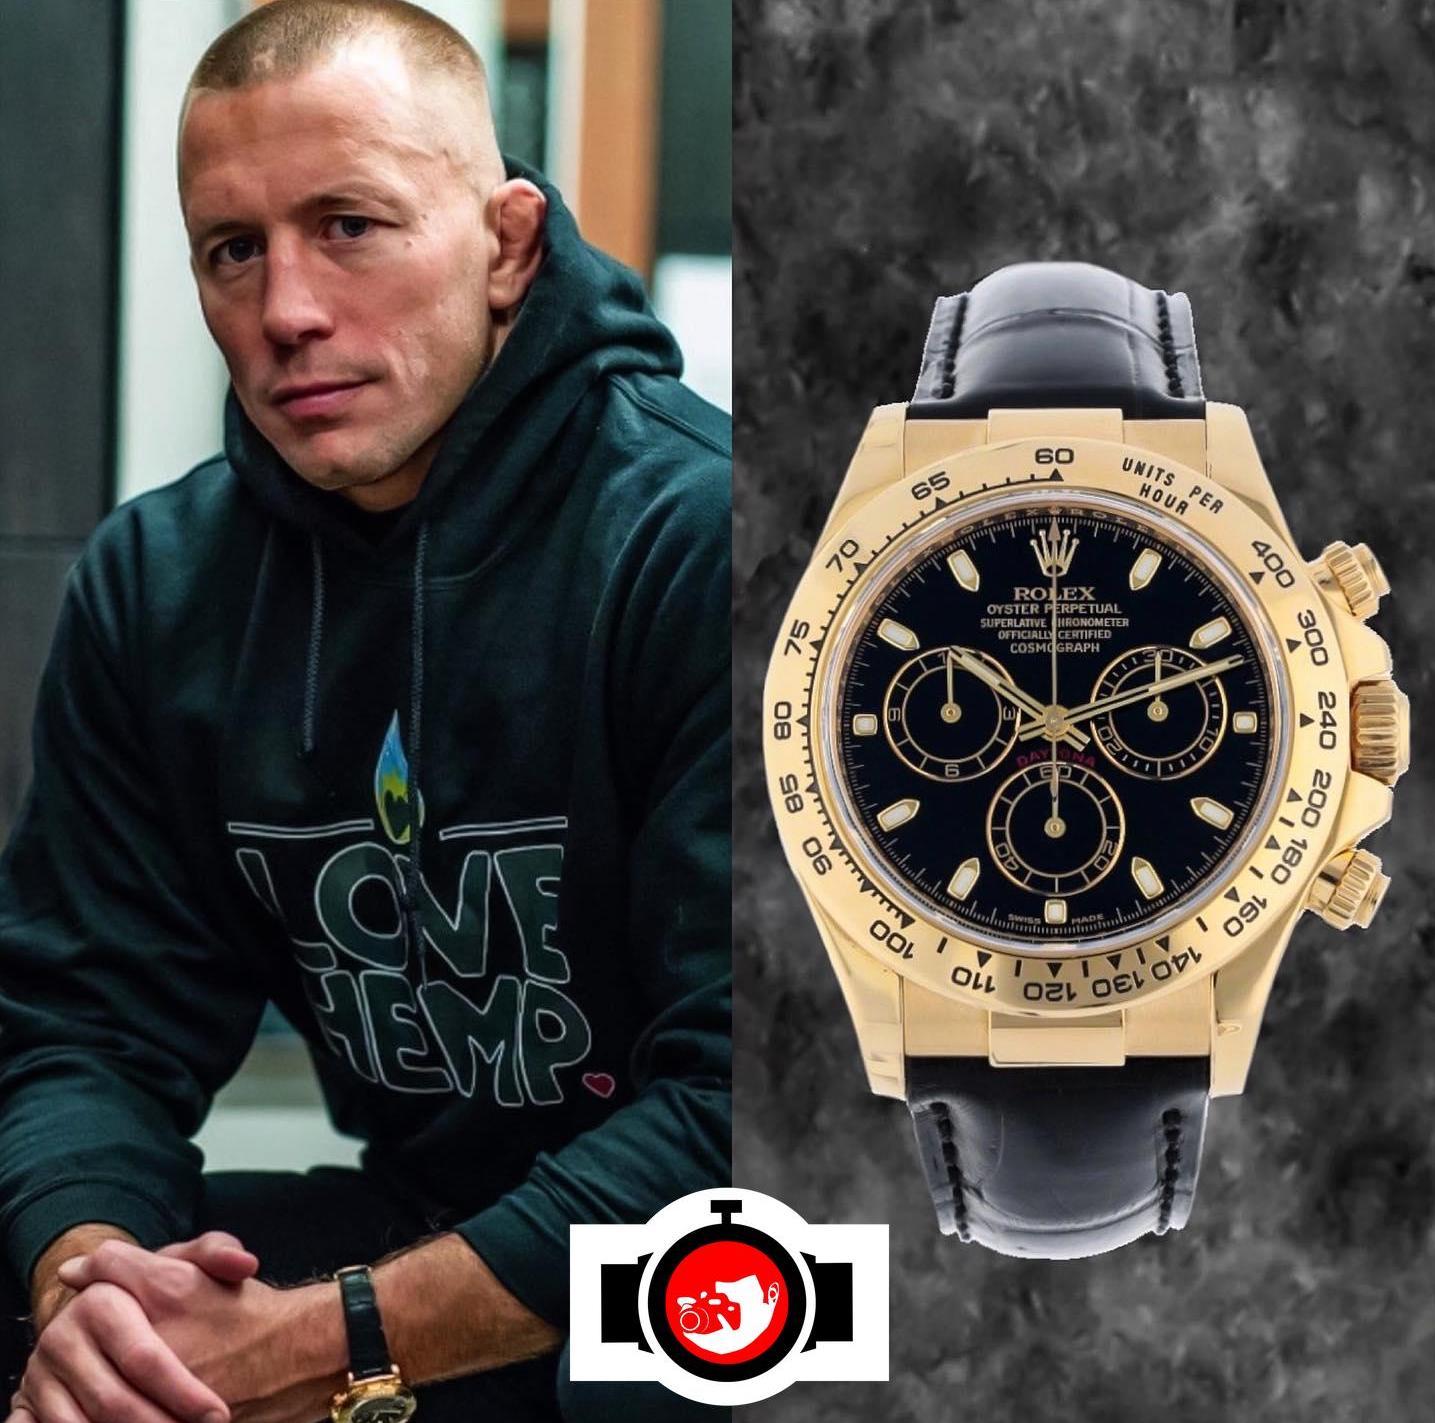 mixed martial artist Georges St Pierre spotted wearing a Rolex 116518